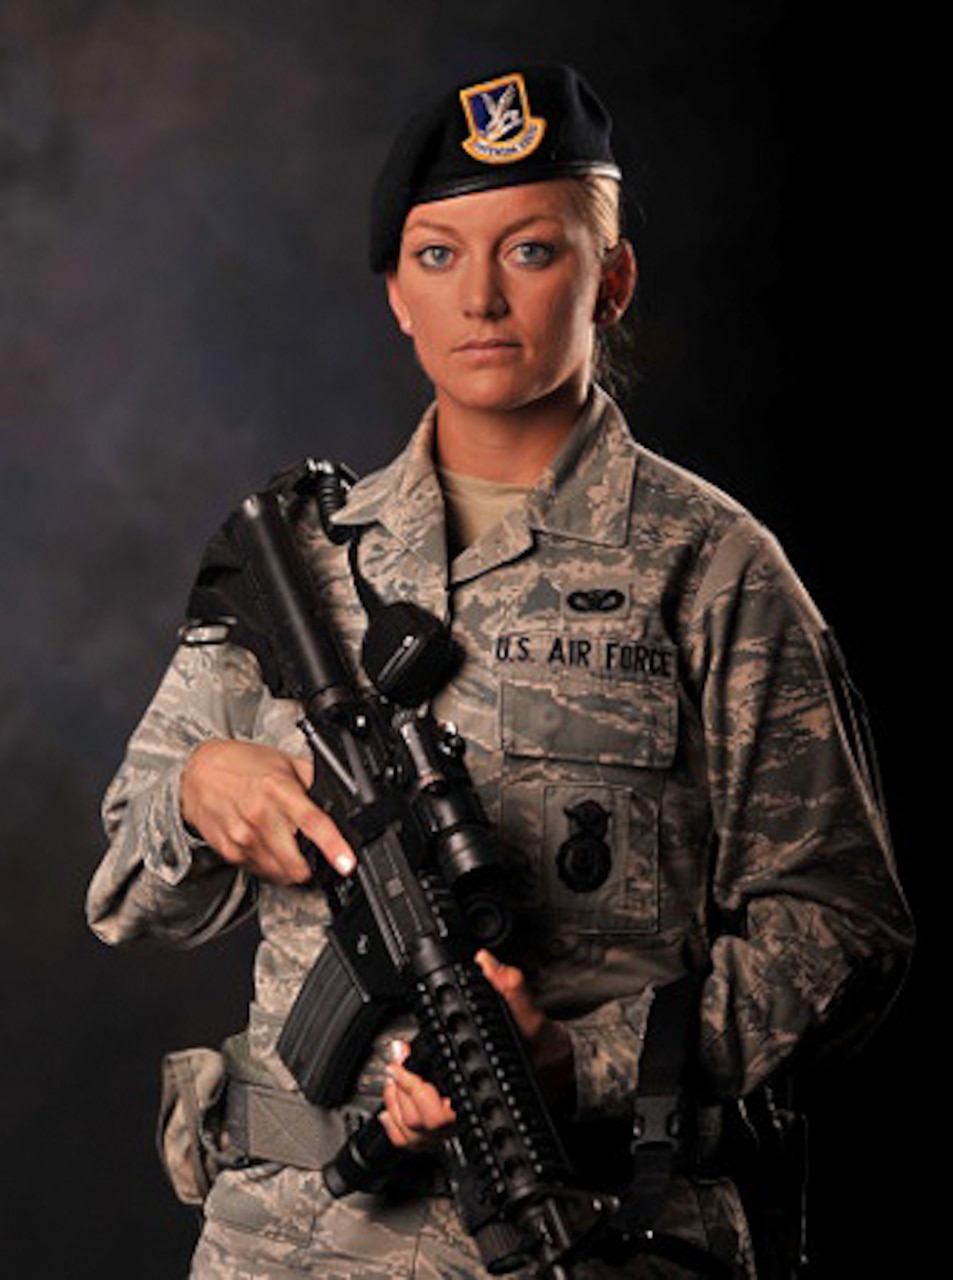 Air Force Senior Airman Julie Breault of the 97th Security Forces Squadron at Altus Air Force Base, Okla., is a 4th-generation service member, and she aspires to be the first female chief master sergeant of the Air Force. Breault said she chose security forces because she feels like she can make a difference as a defender. U.S. Air Force photo by Airman 1st Class Megan E. Acs